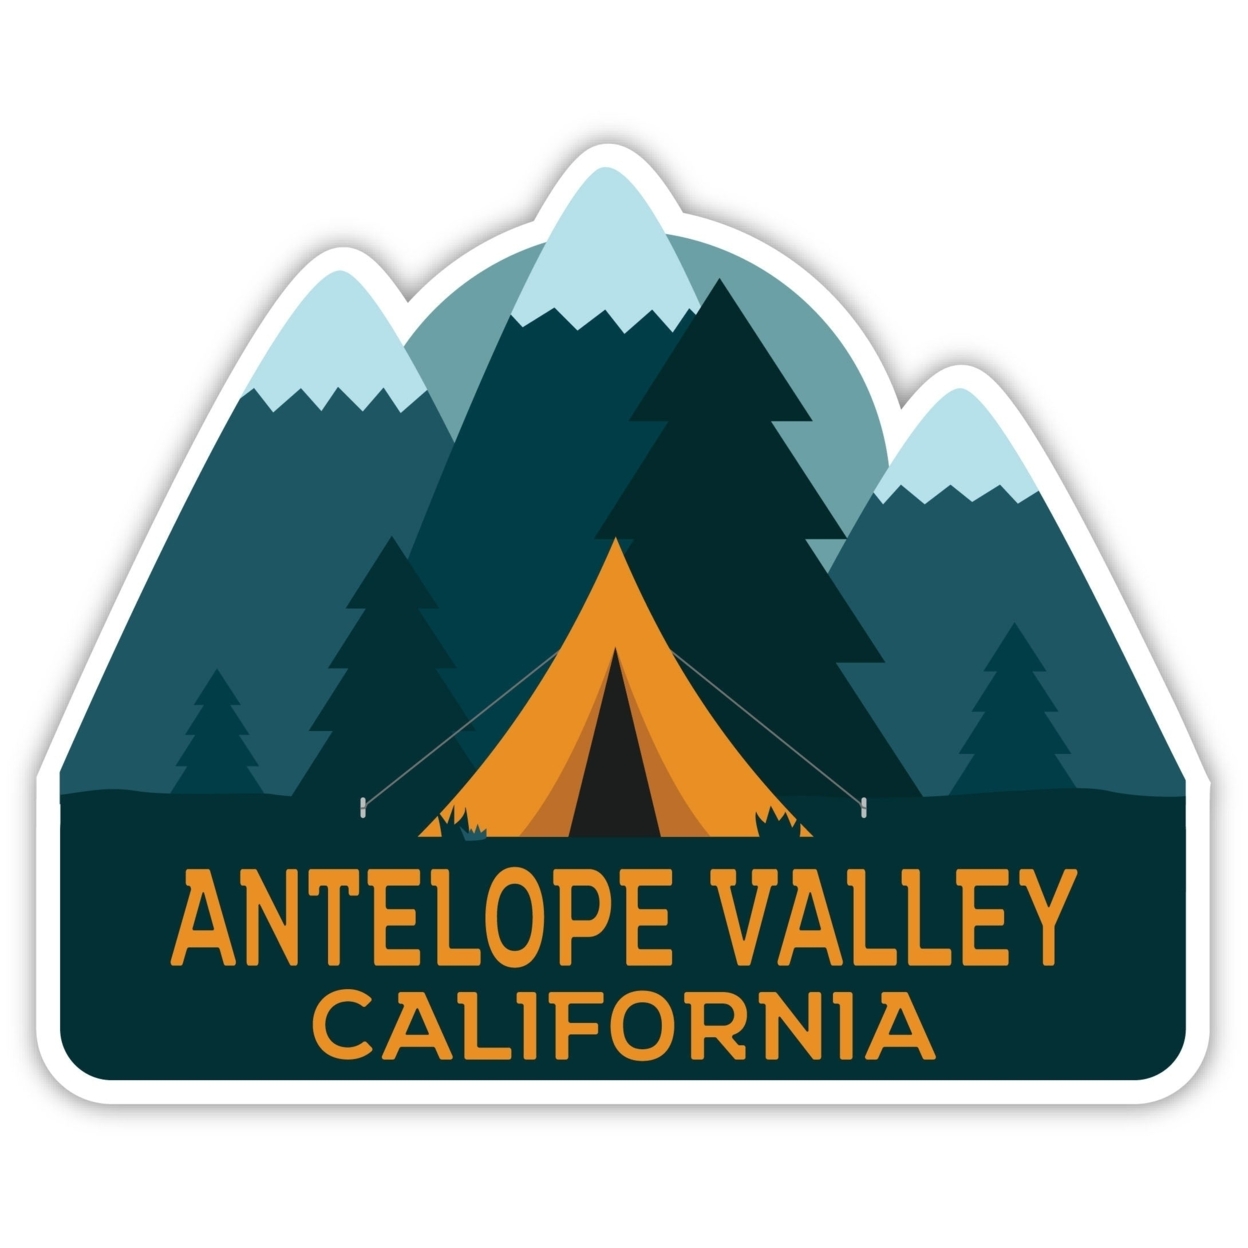 Antelope Valley California Souvenir Decorative Stickers (Choose Theme And Size) - 4-Pack, 8-Inch, Tent